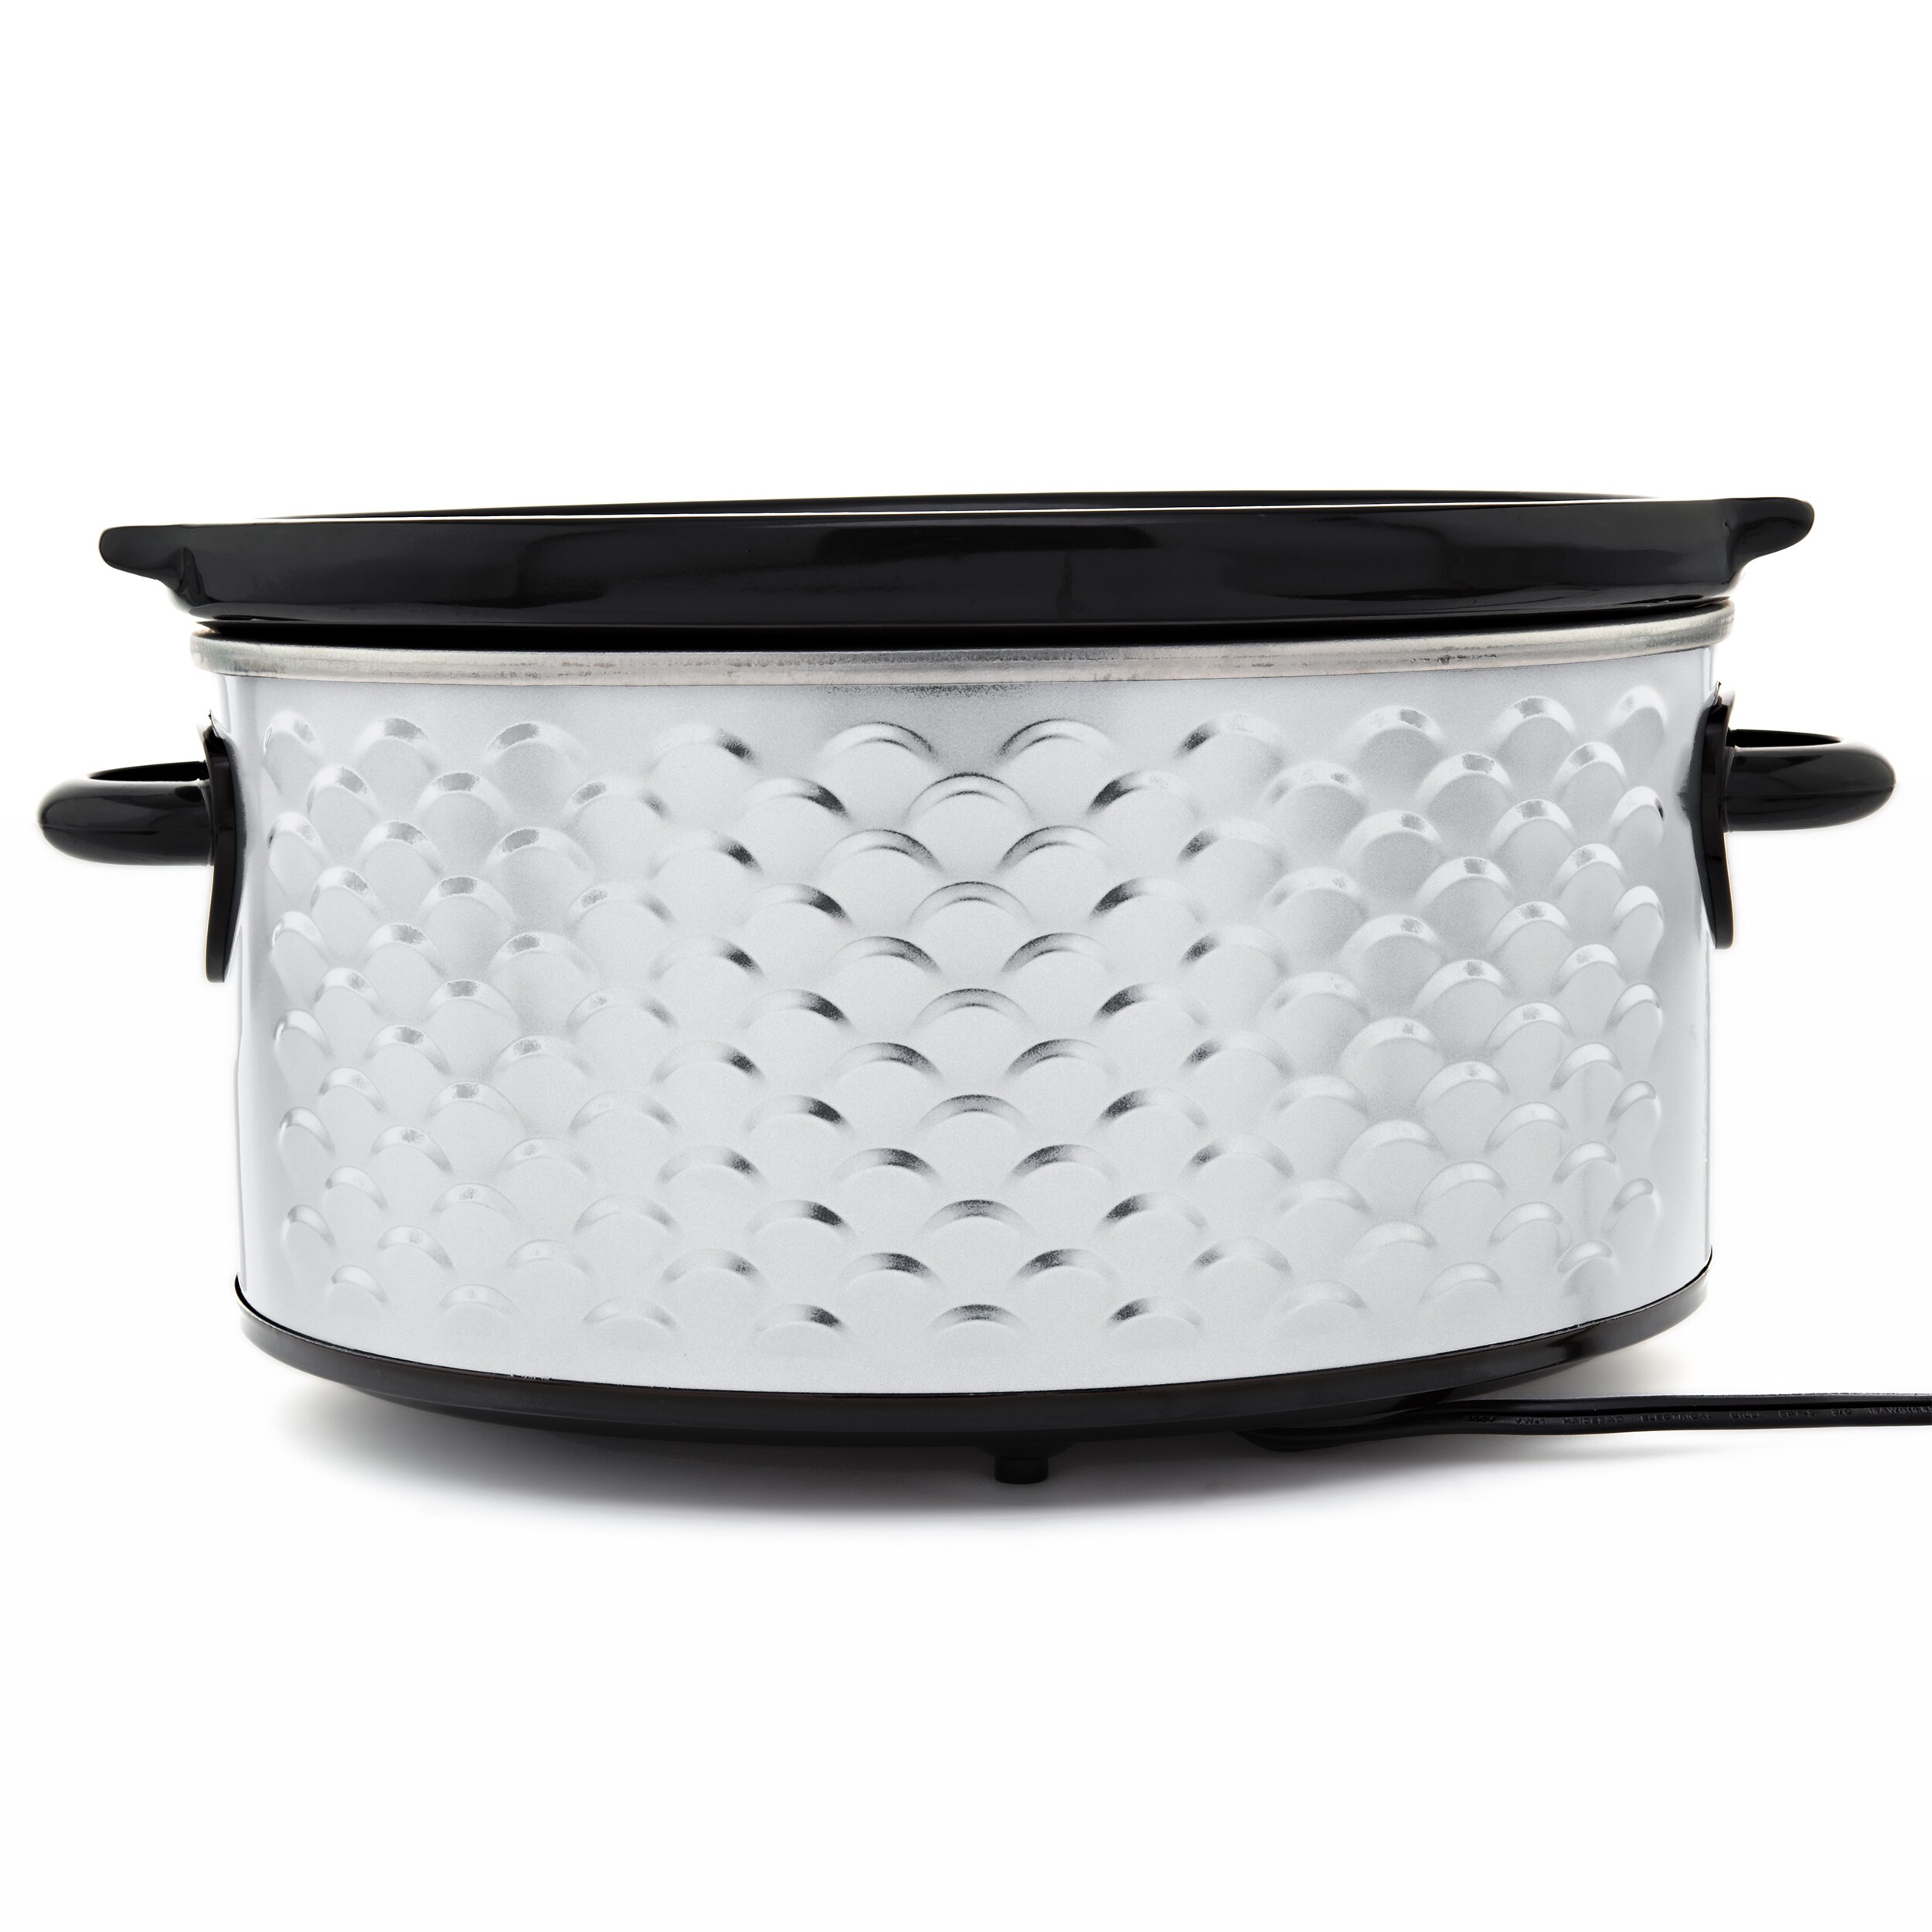 https://ak1.ostkcdn.com/images/products/is/images/direct/d6eea69b056f31fe16bc727621857b6fa74ceed8/Brentwood-Scallop-Pattern-4.5-Quart-Slow-Cooker-in-Stainless-Steel.jpg